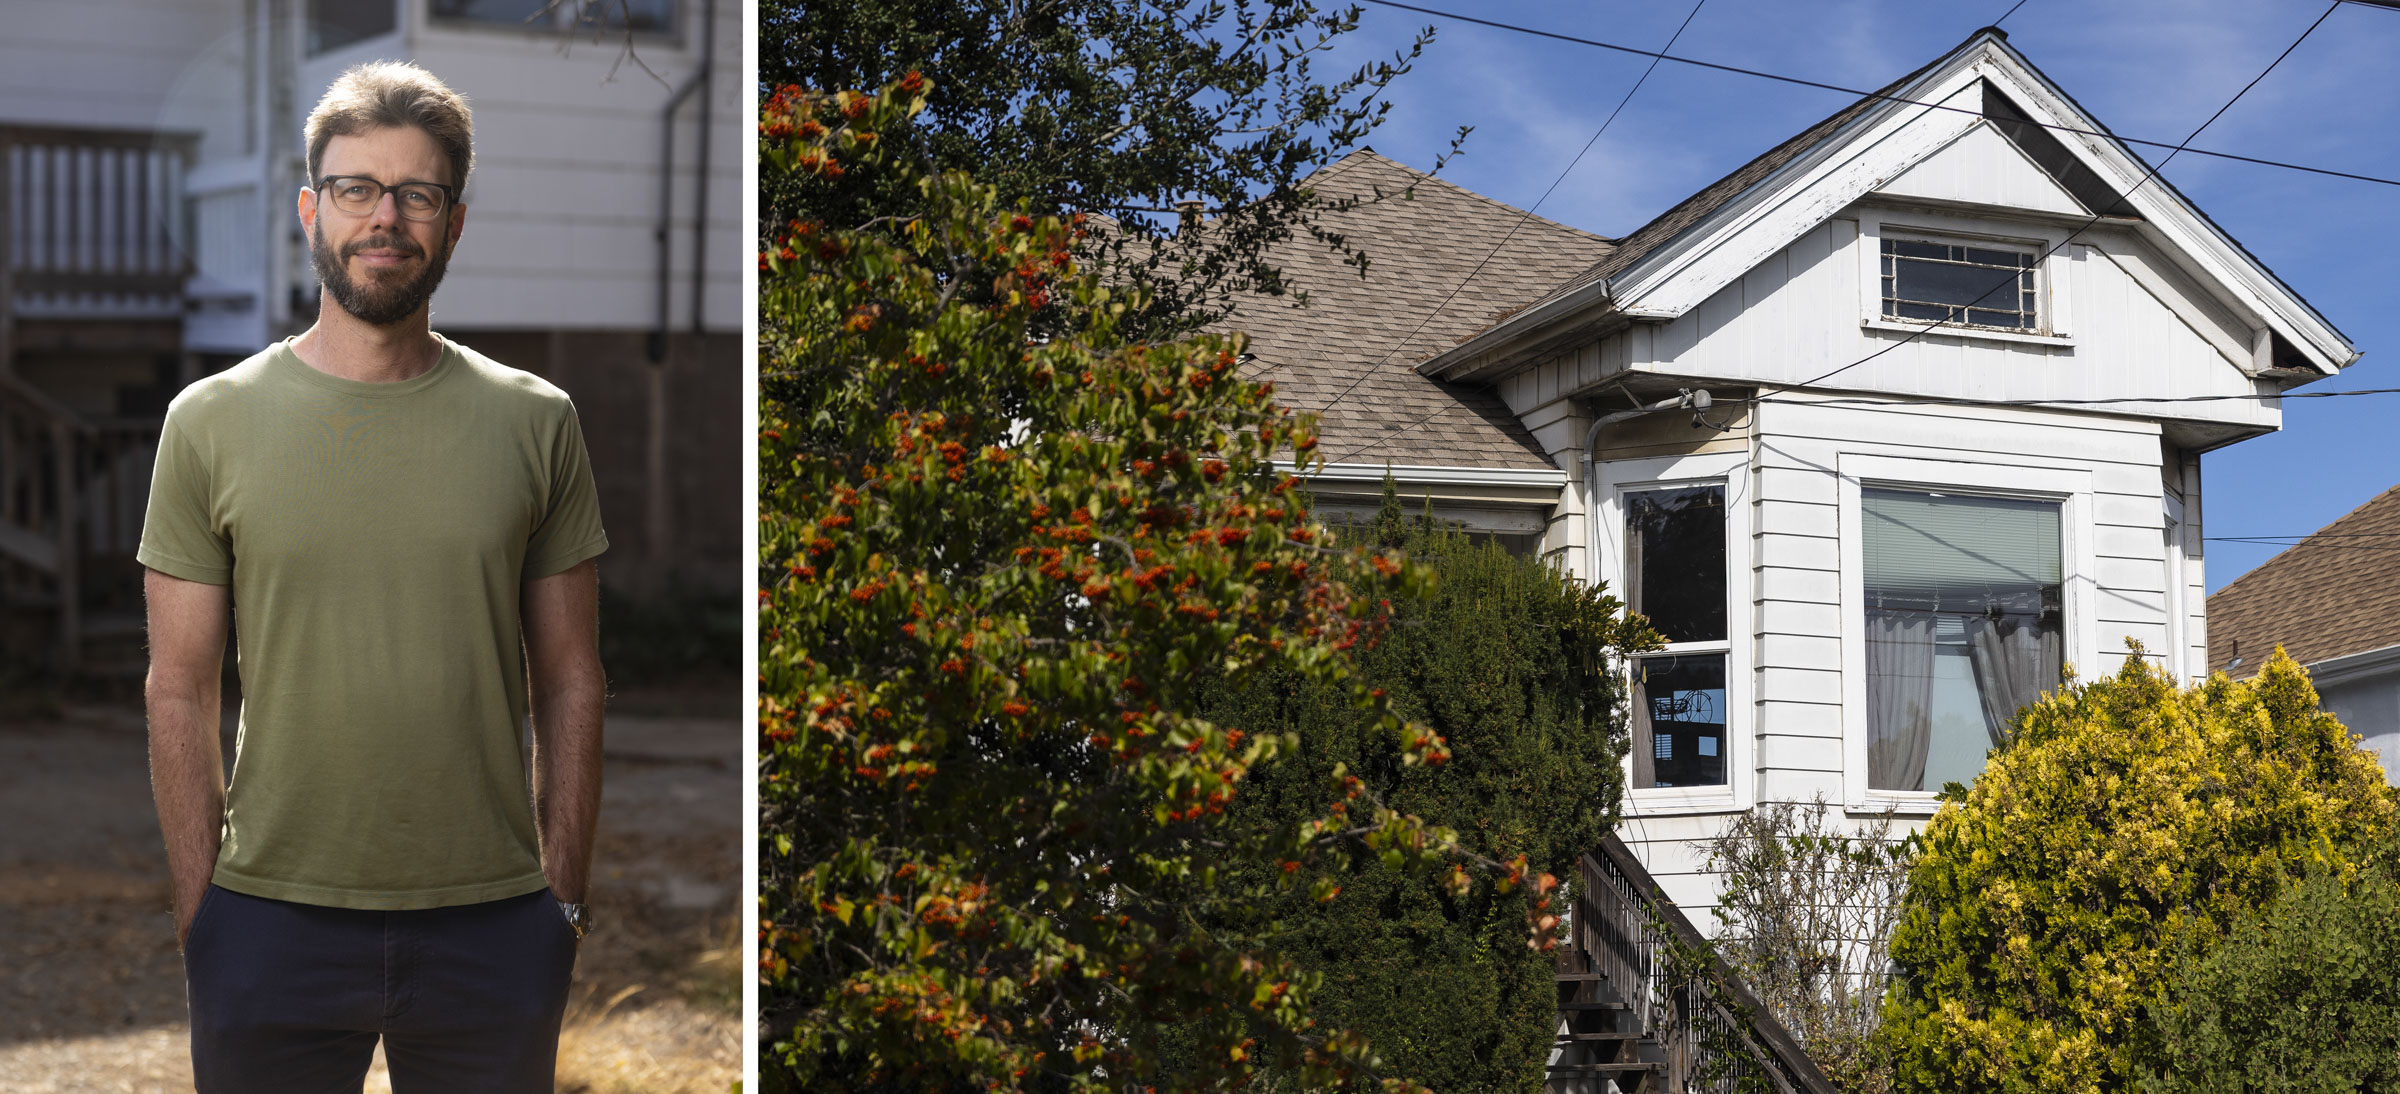 Two photos side by side: one of a person with glasses and one of a house.